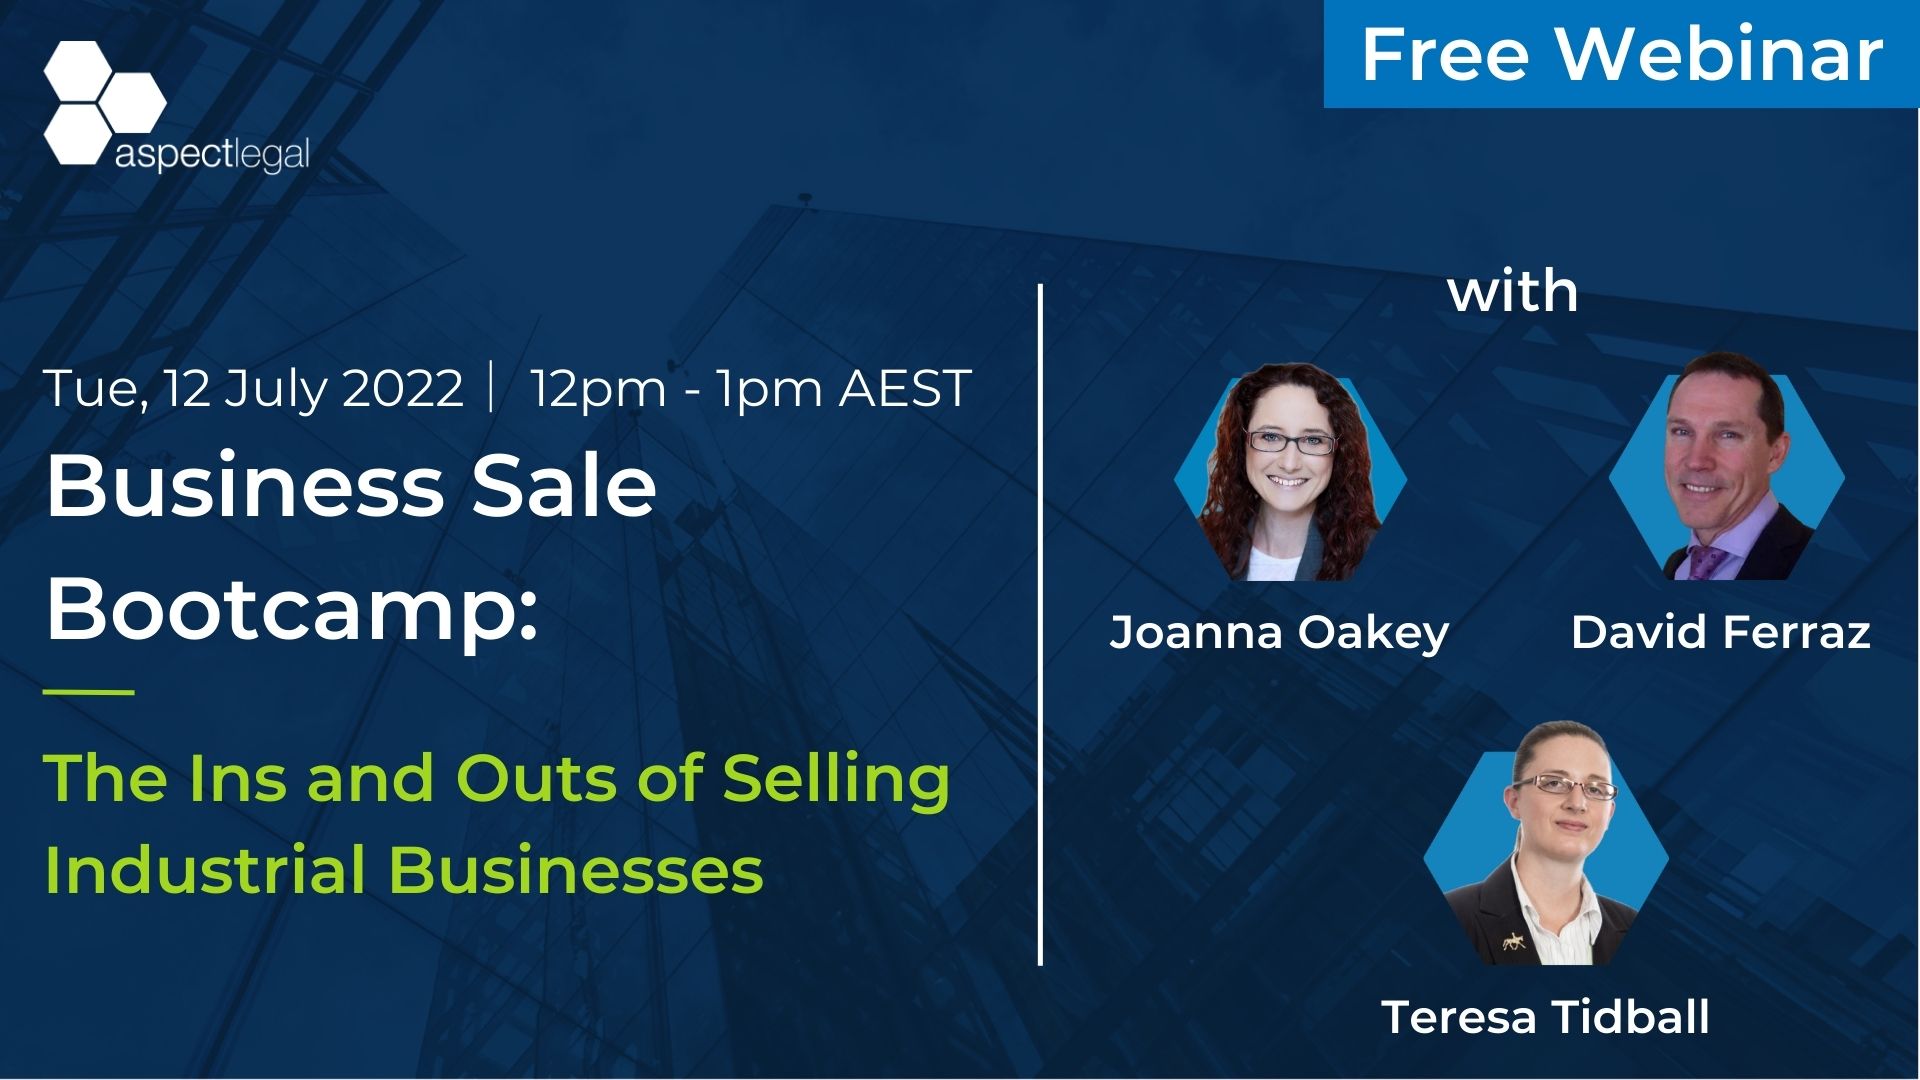 Business Sale Bootcamp - The Ins and Outs of Selling Industrial Businesses